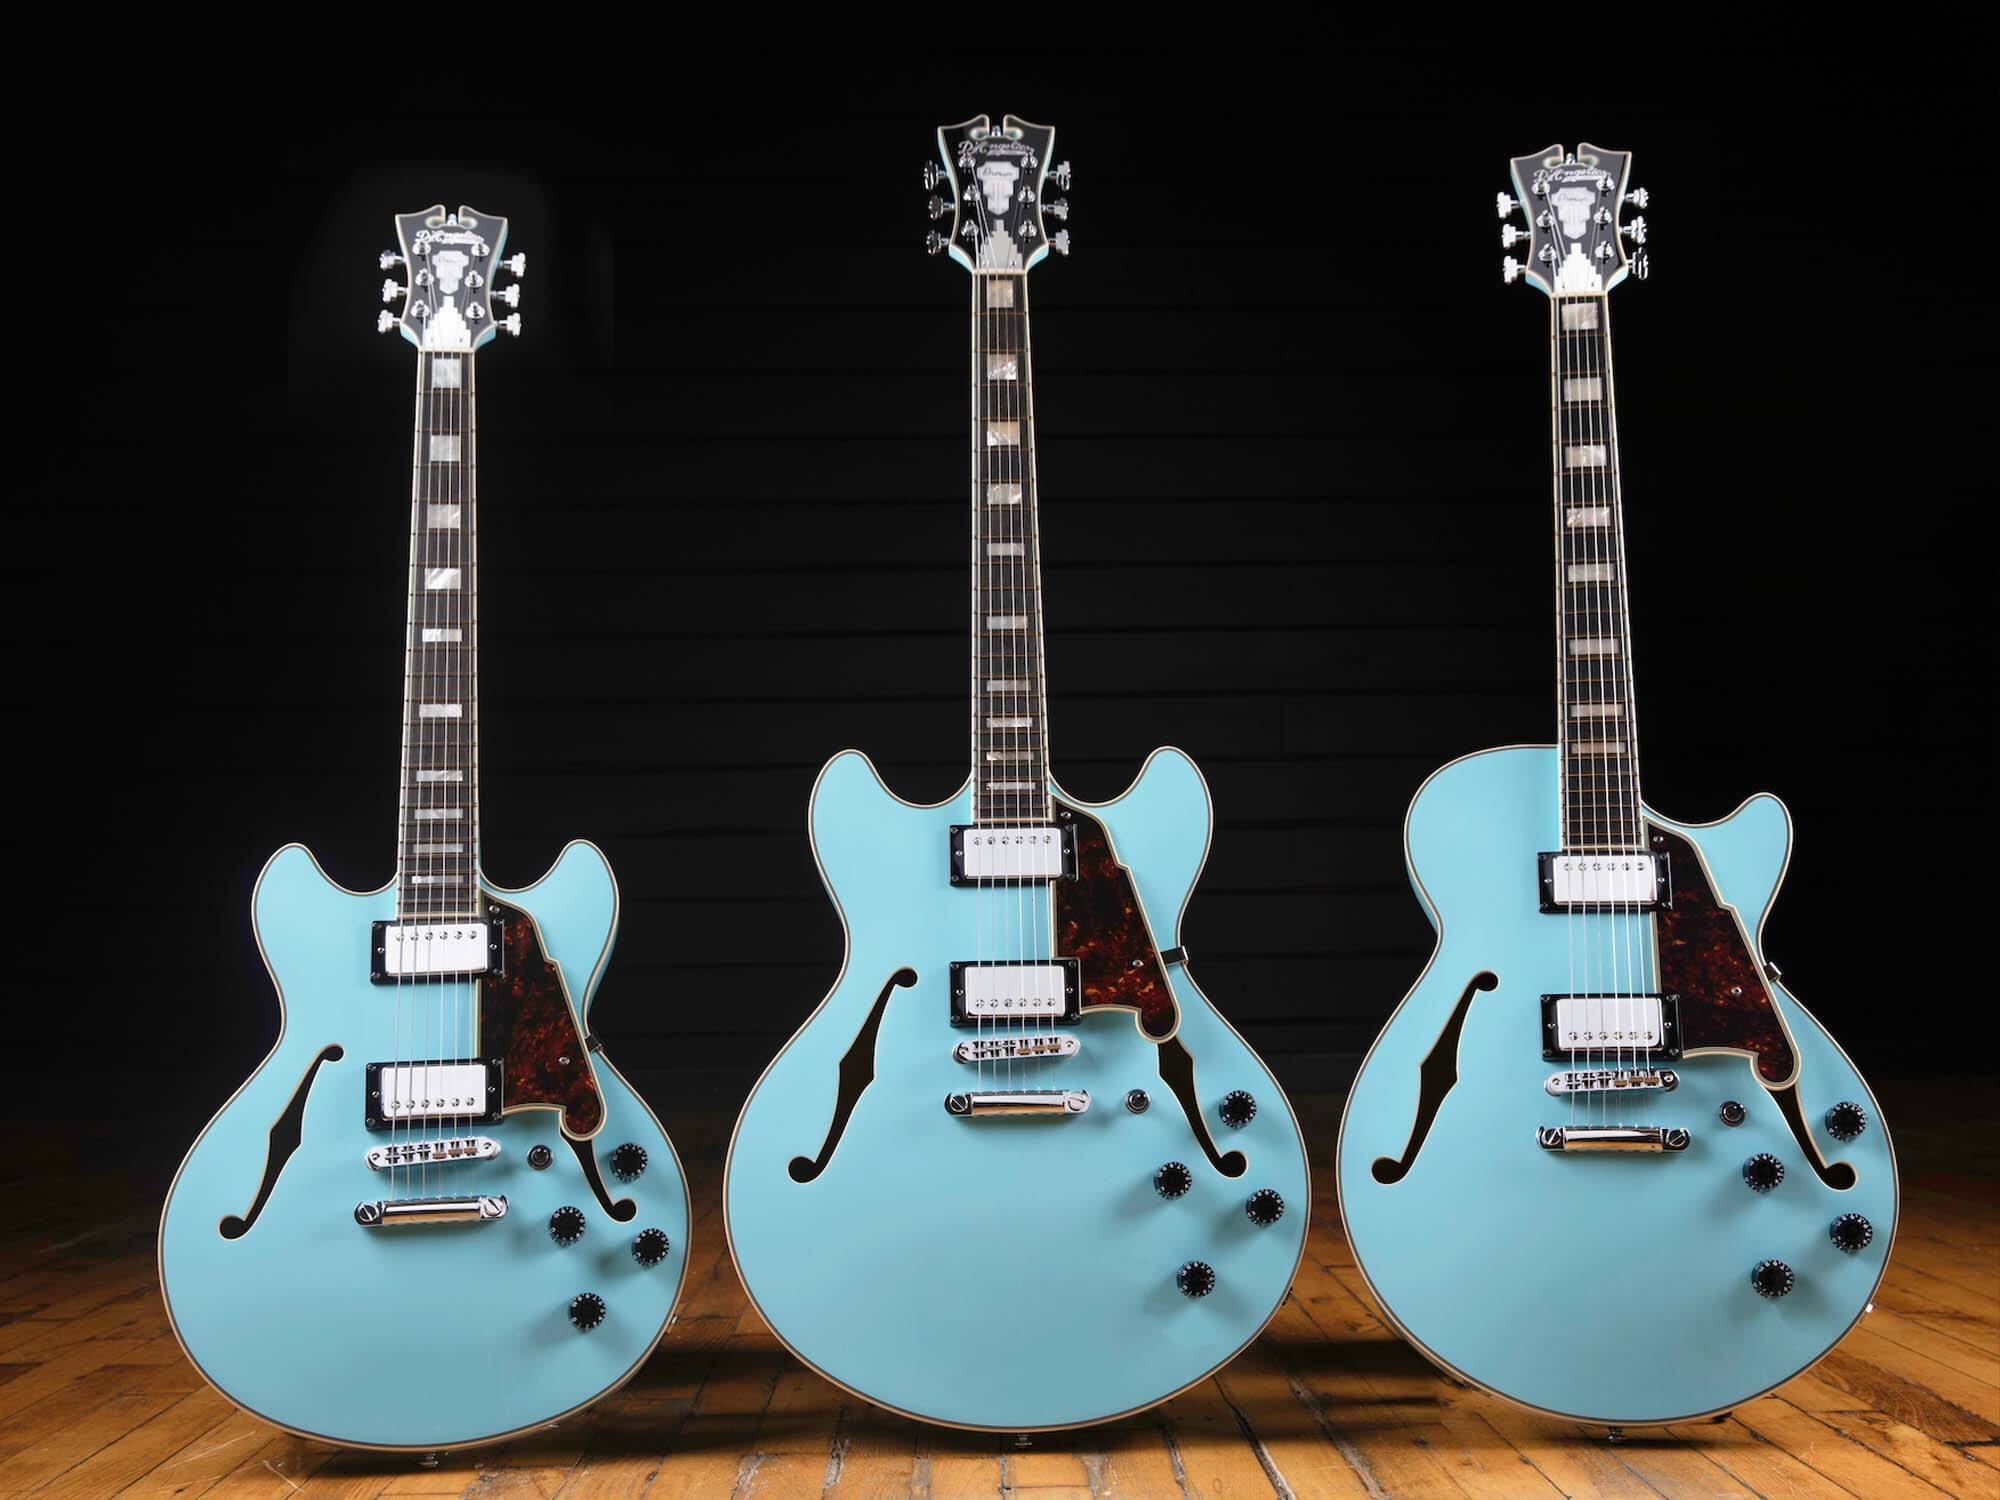 D'angelico Sky Blue finish